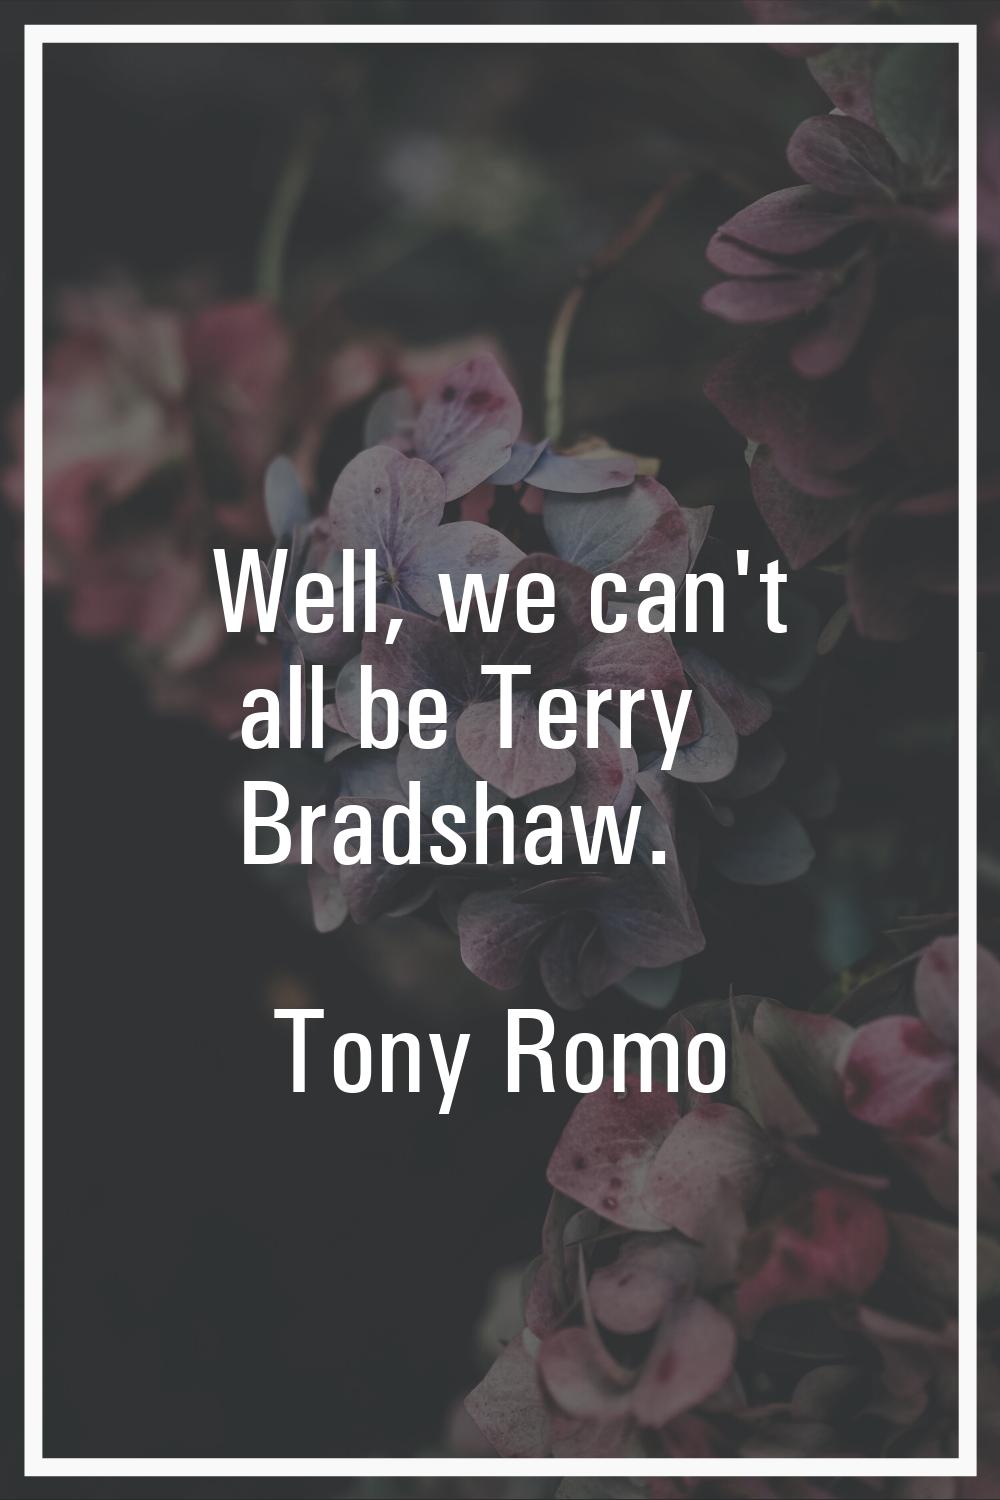 Well, we can't all be Terry Bradshaw.